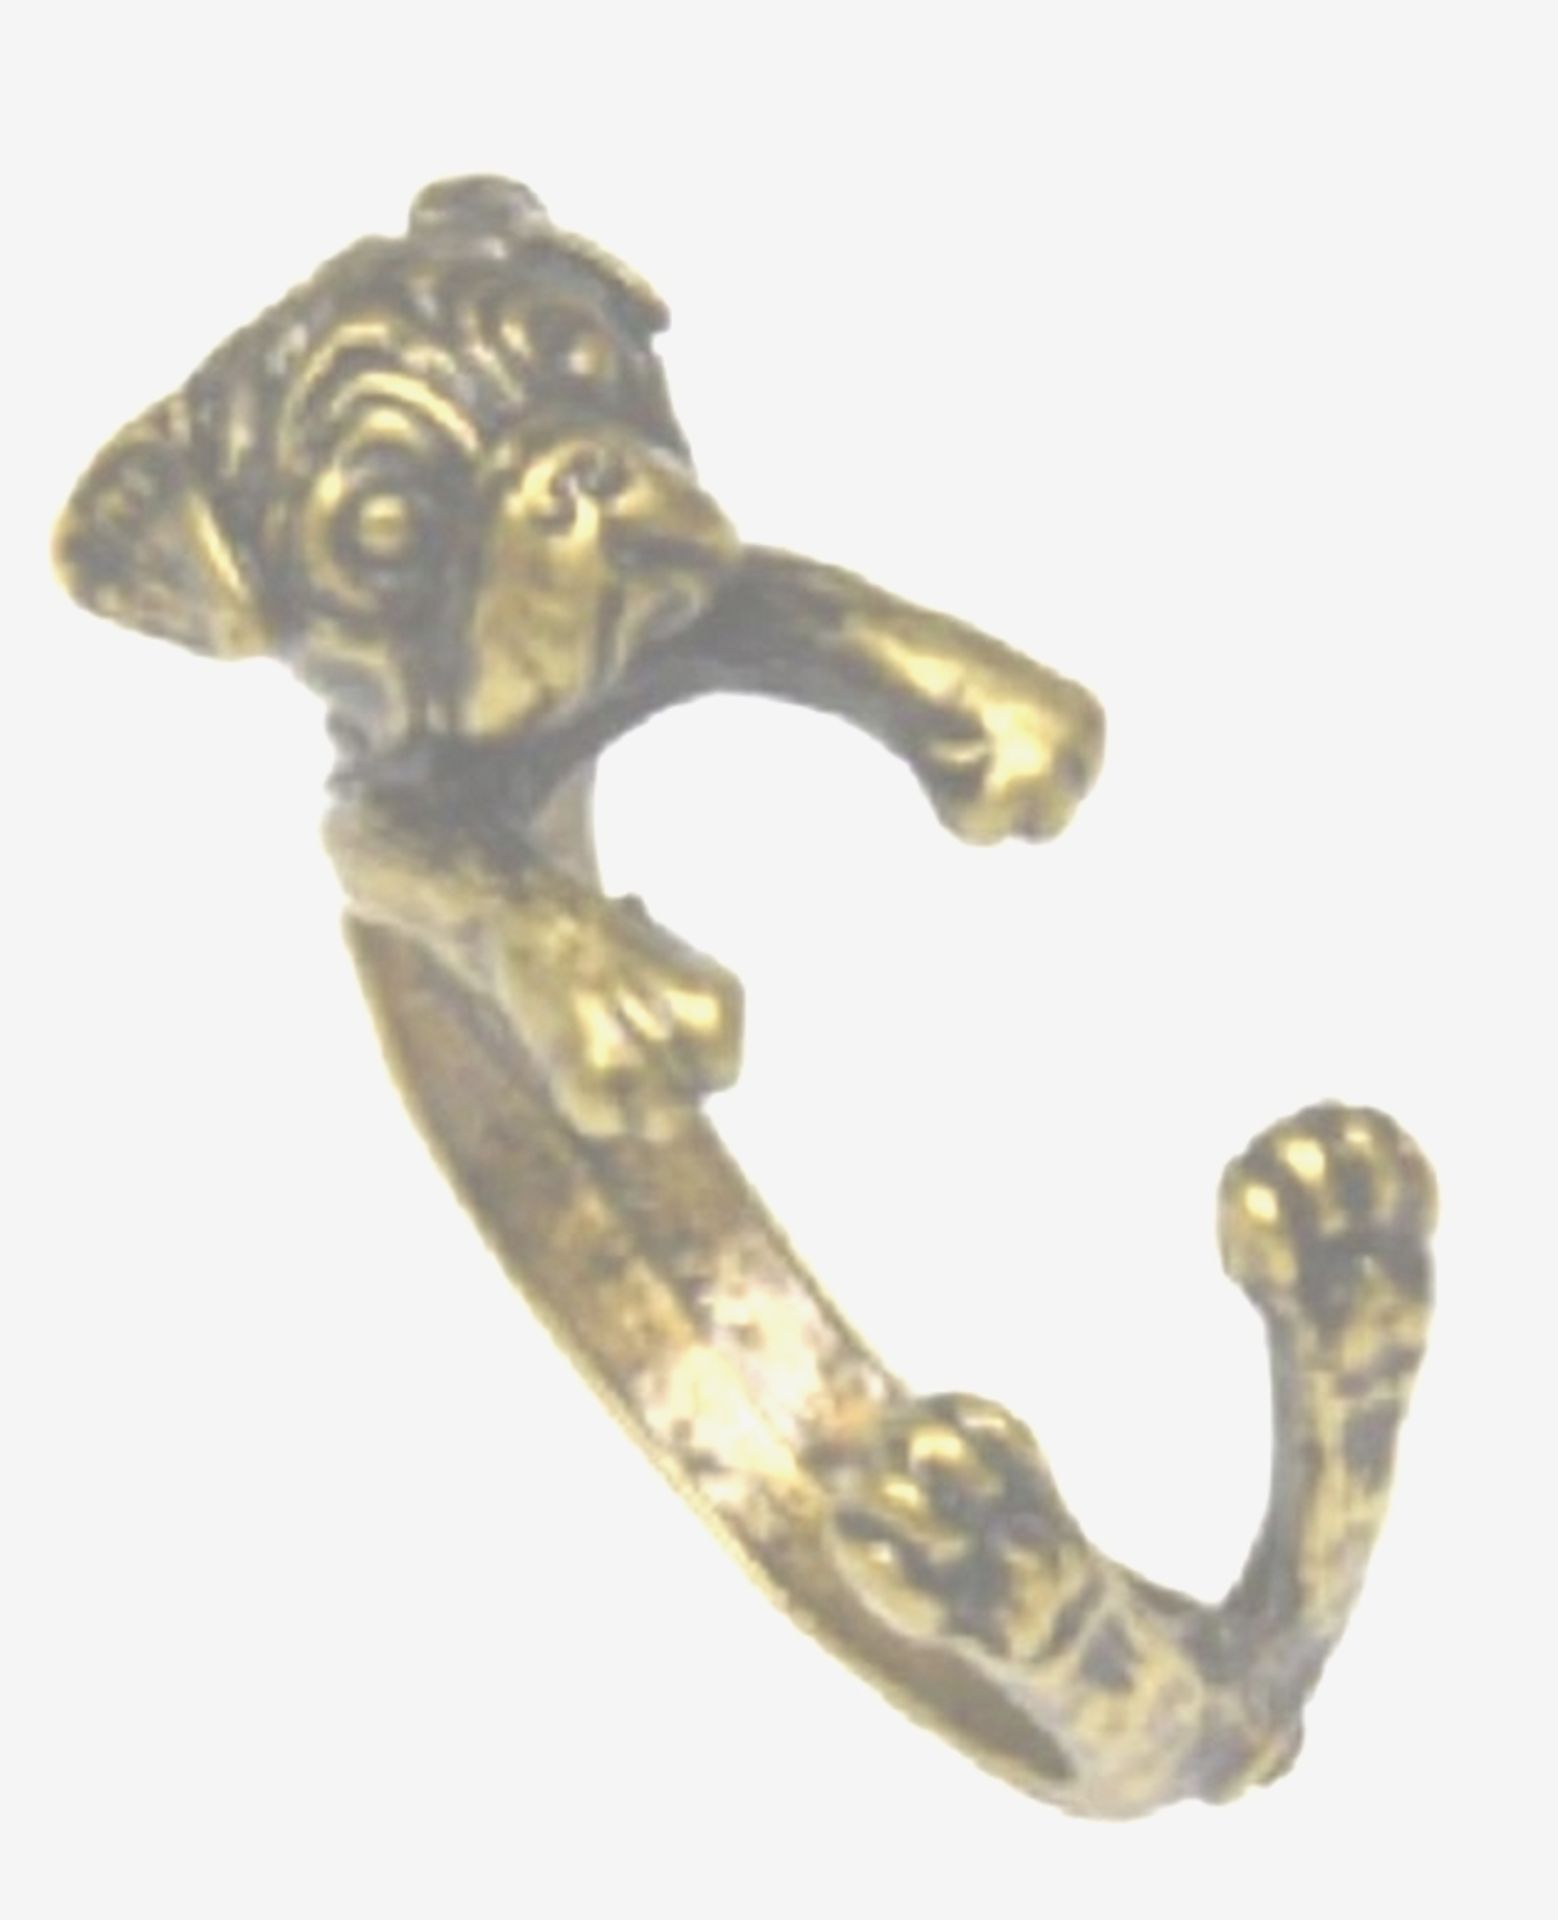 50 Unusual Animal Rings, Can Be Adjusted Easily To Fit Most Fingers - Image 3 of 6